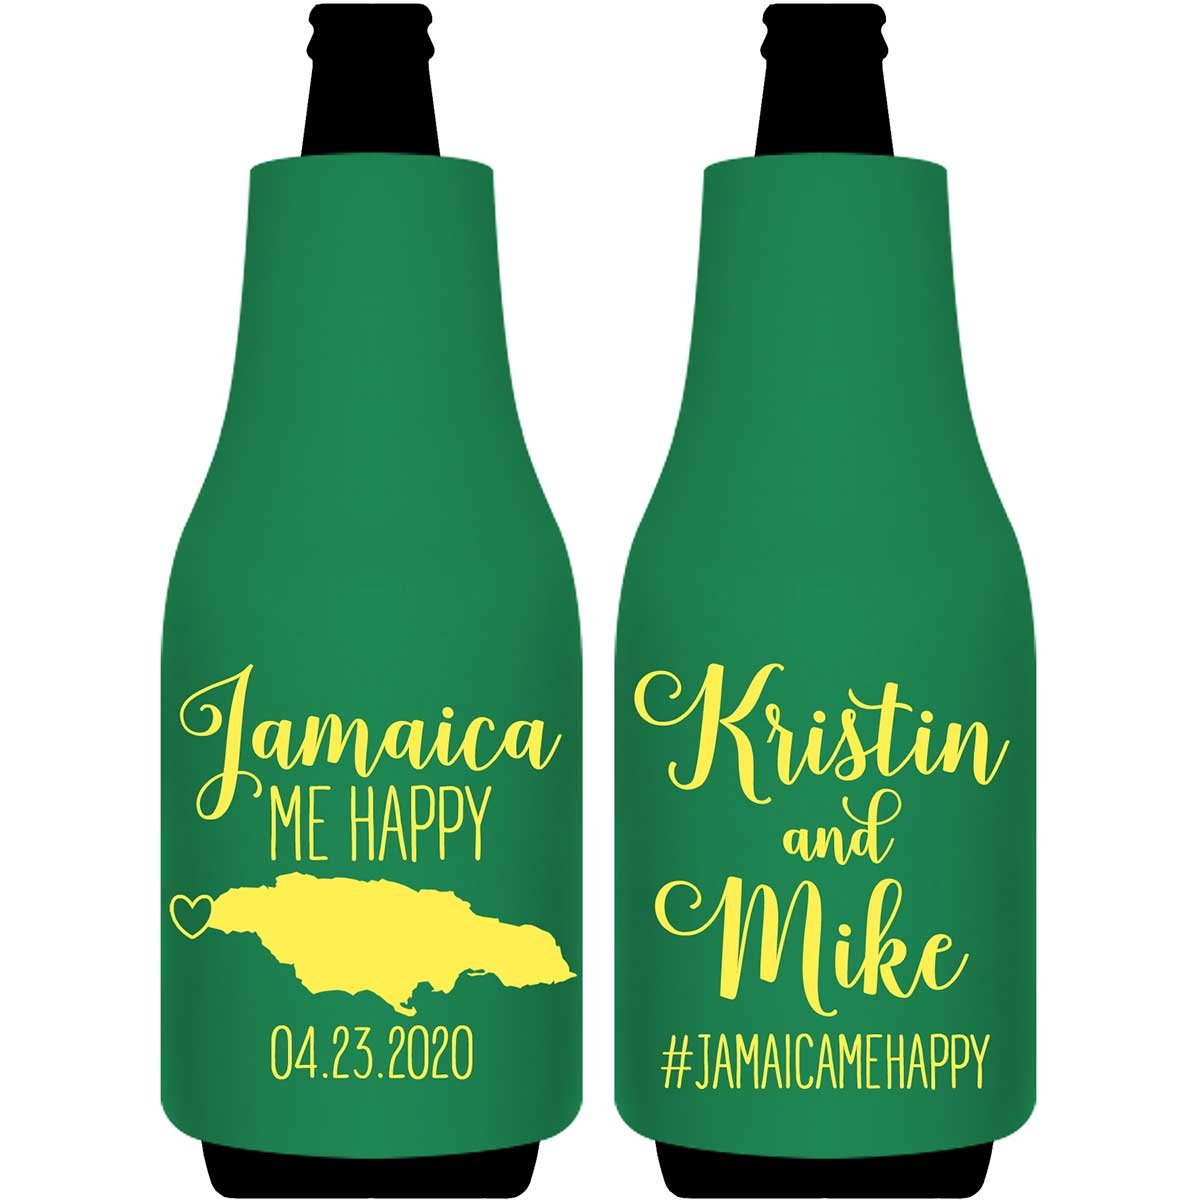 Jamaica Me Happy 1A Foldable Bottle Sleeve Koozies Wedding Gifts for Guests